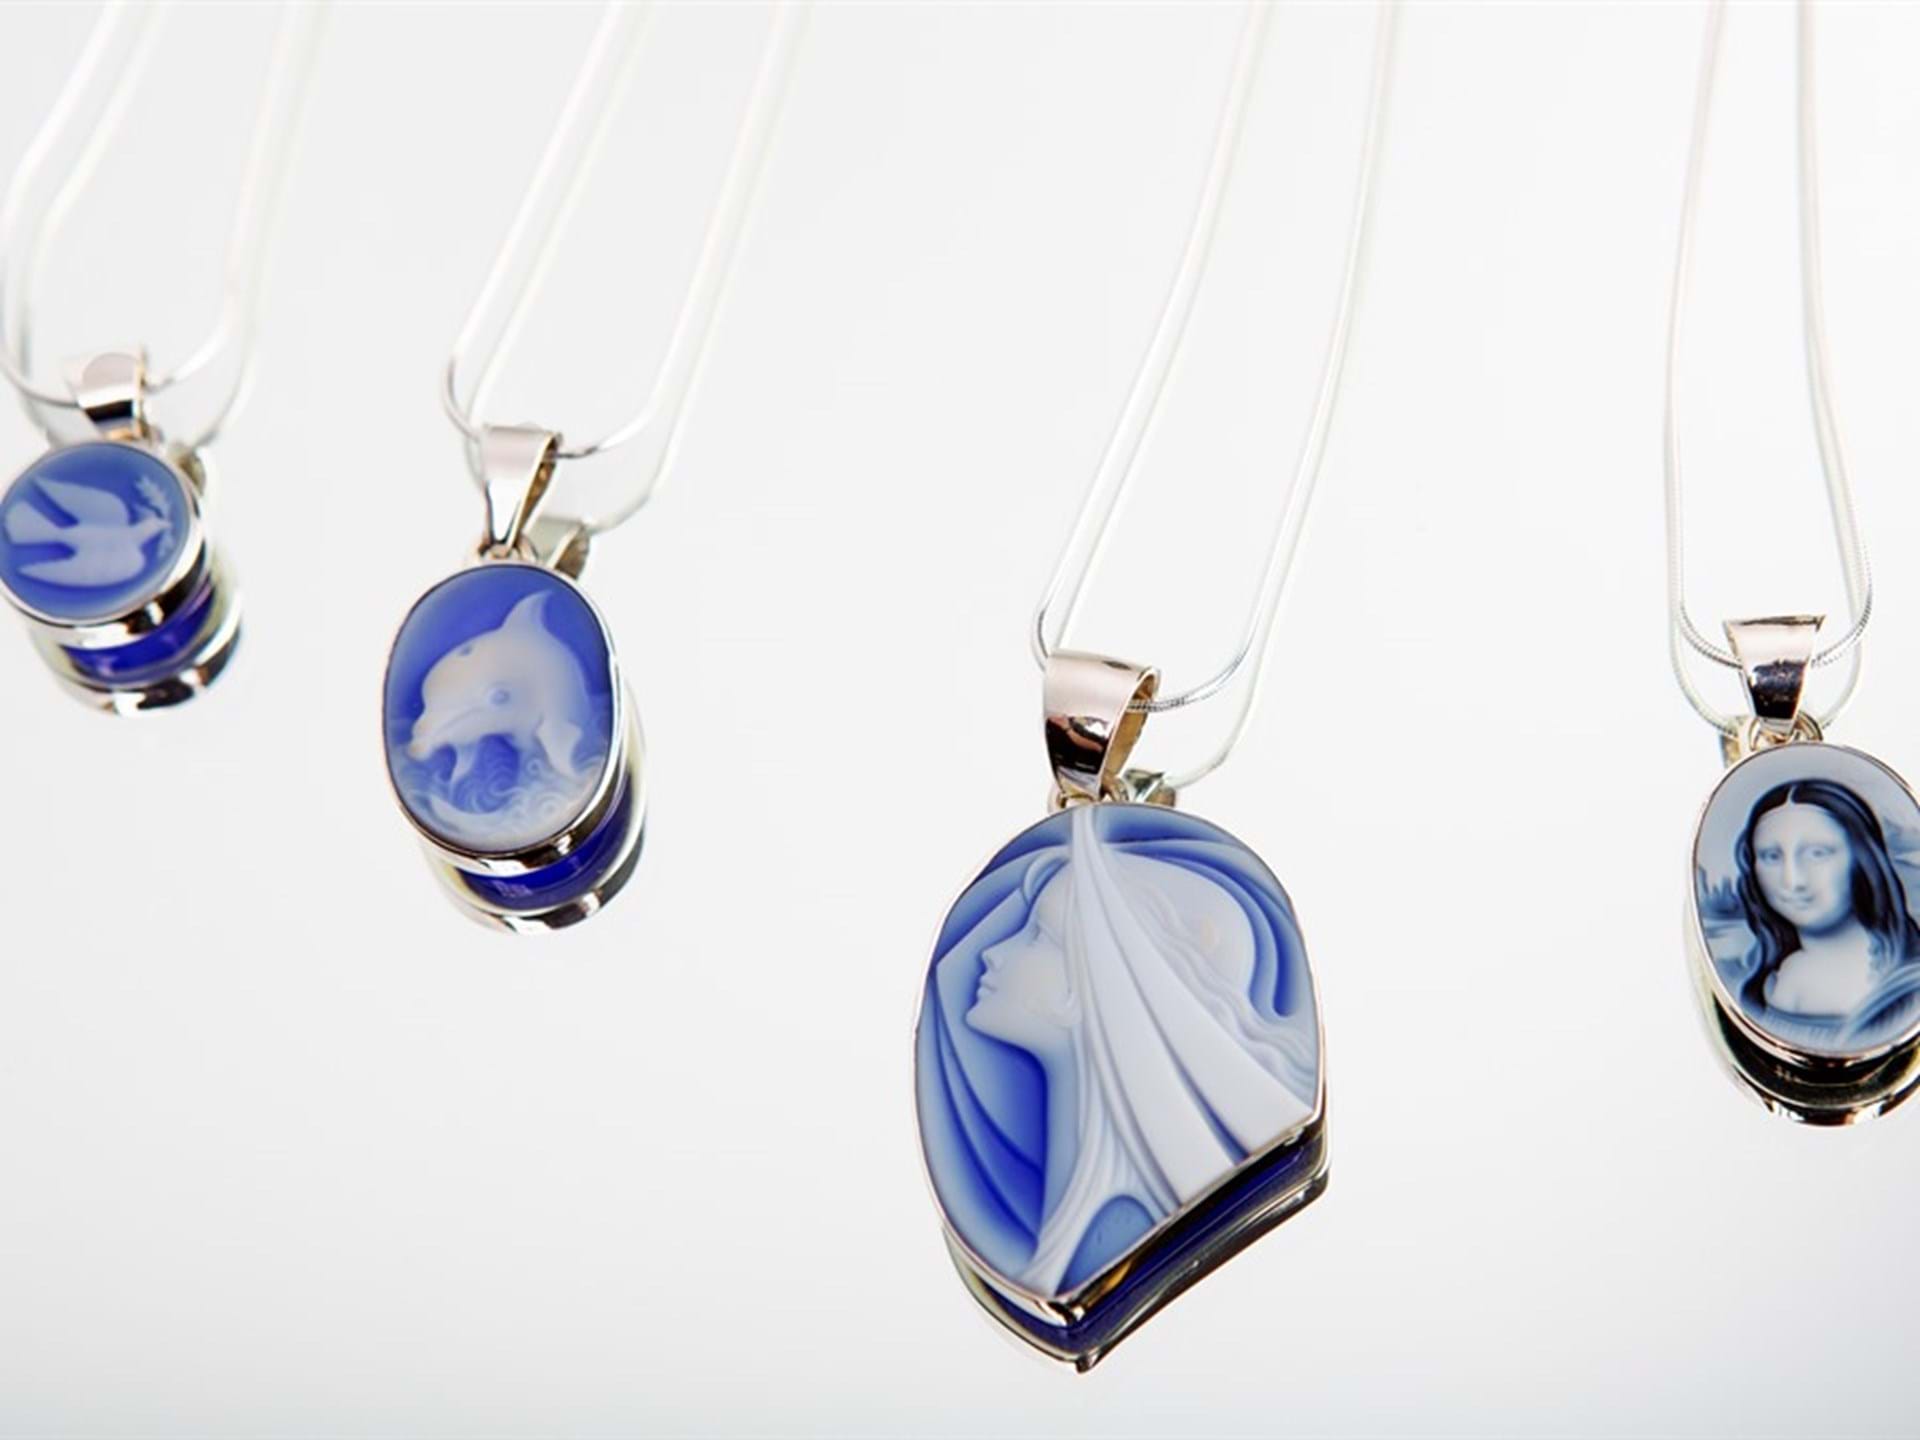 Carved agate cameo necklaces available at Glassando